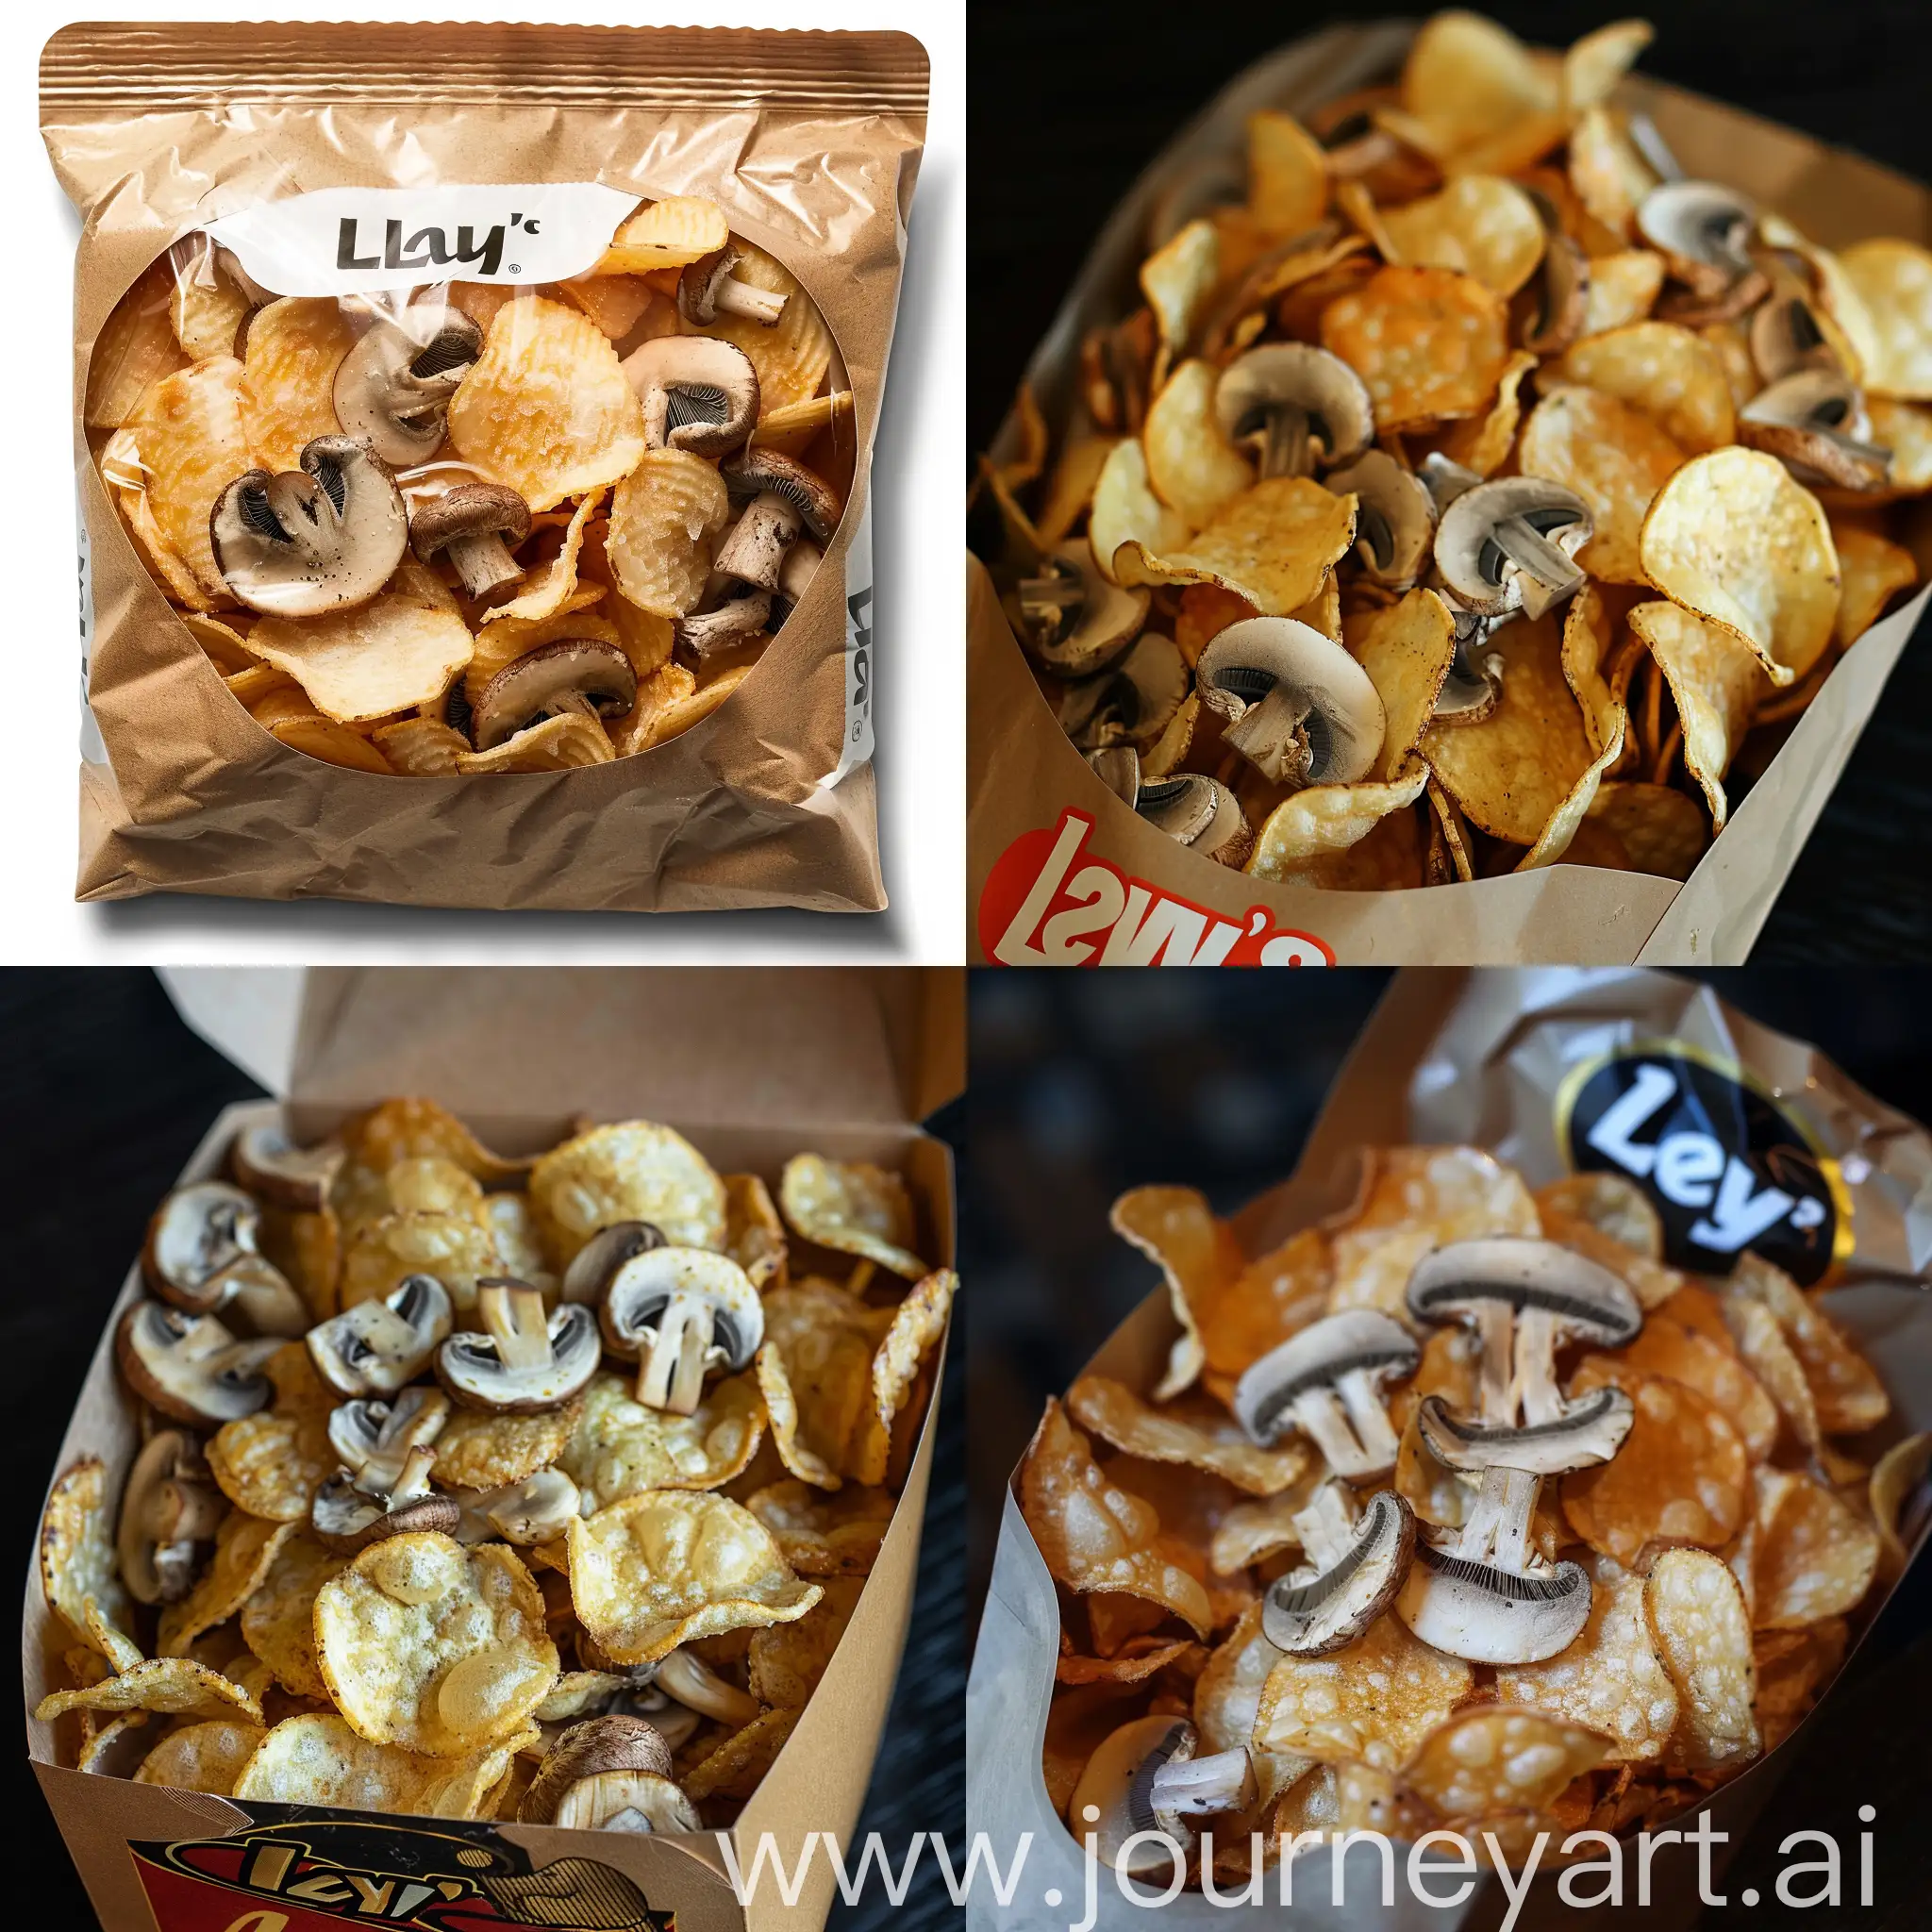 Savory-Lays-Chips-and-Fresh-Mushrooms-in-Rustic-Packaging